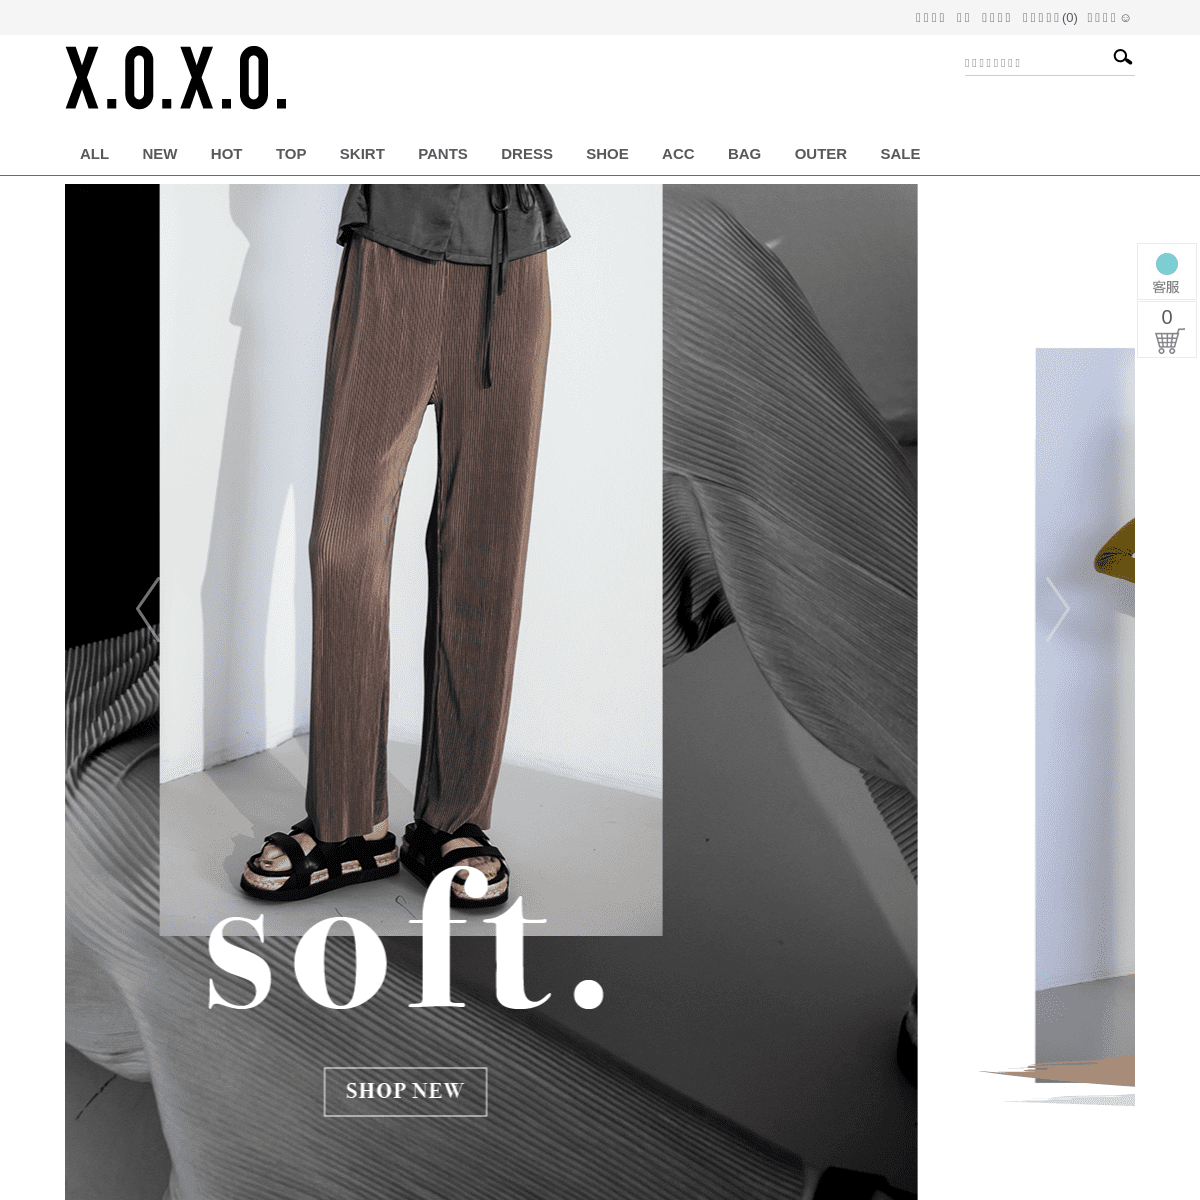 A complete backup of xoxostyle.com.tw